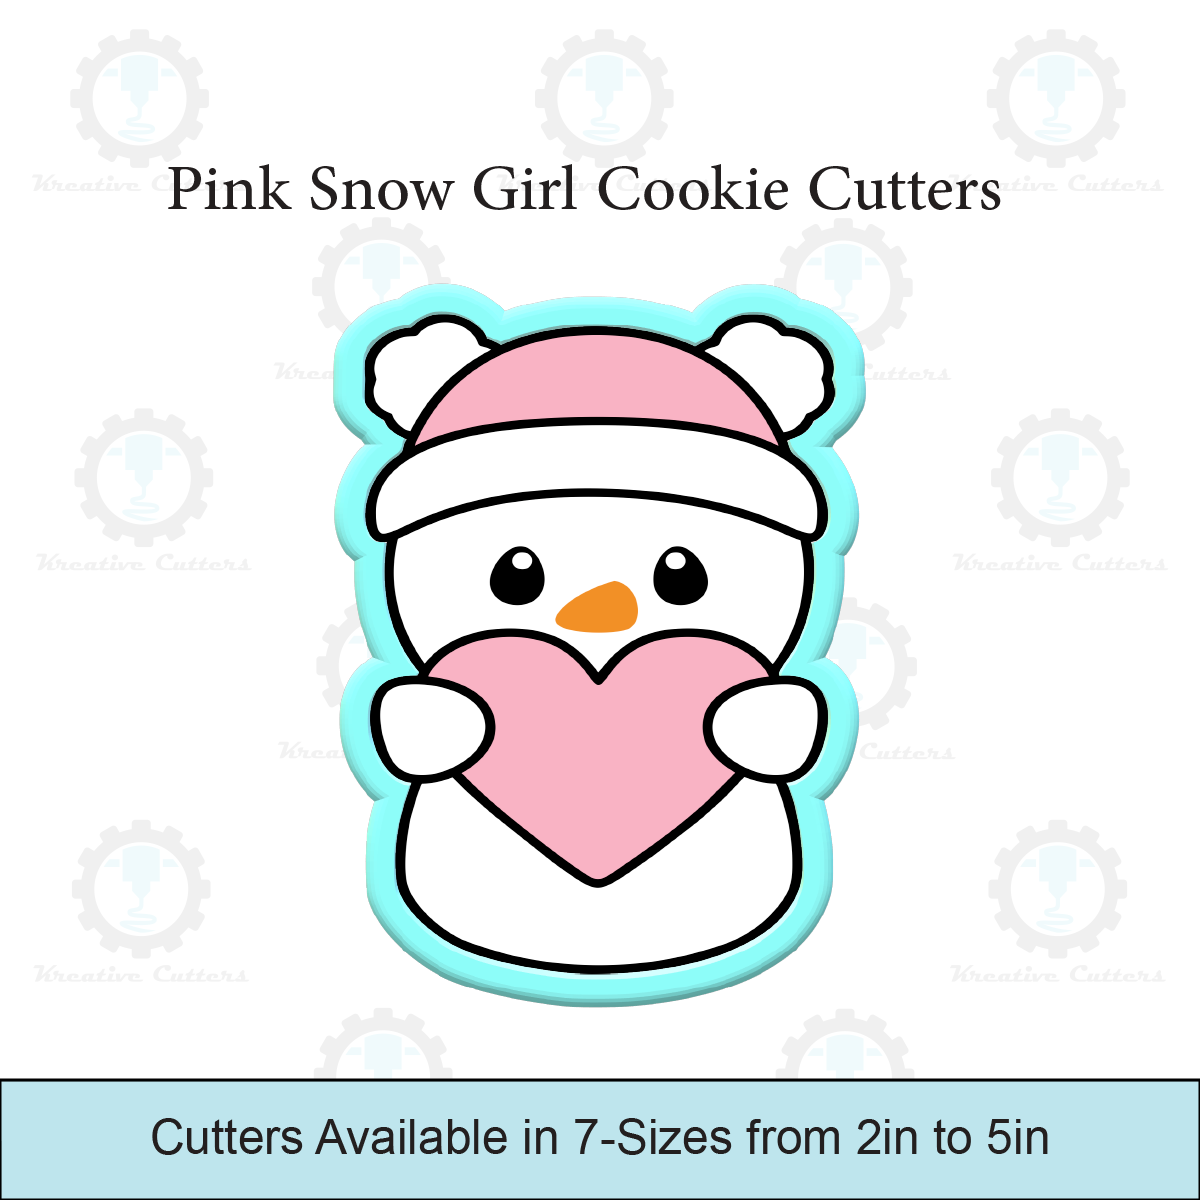 Pink Snow Girl Cookie Cutters